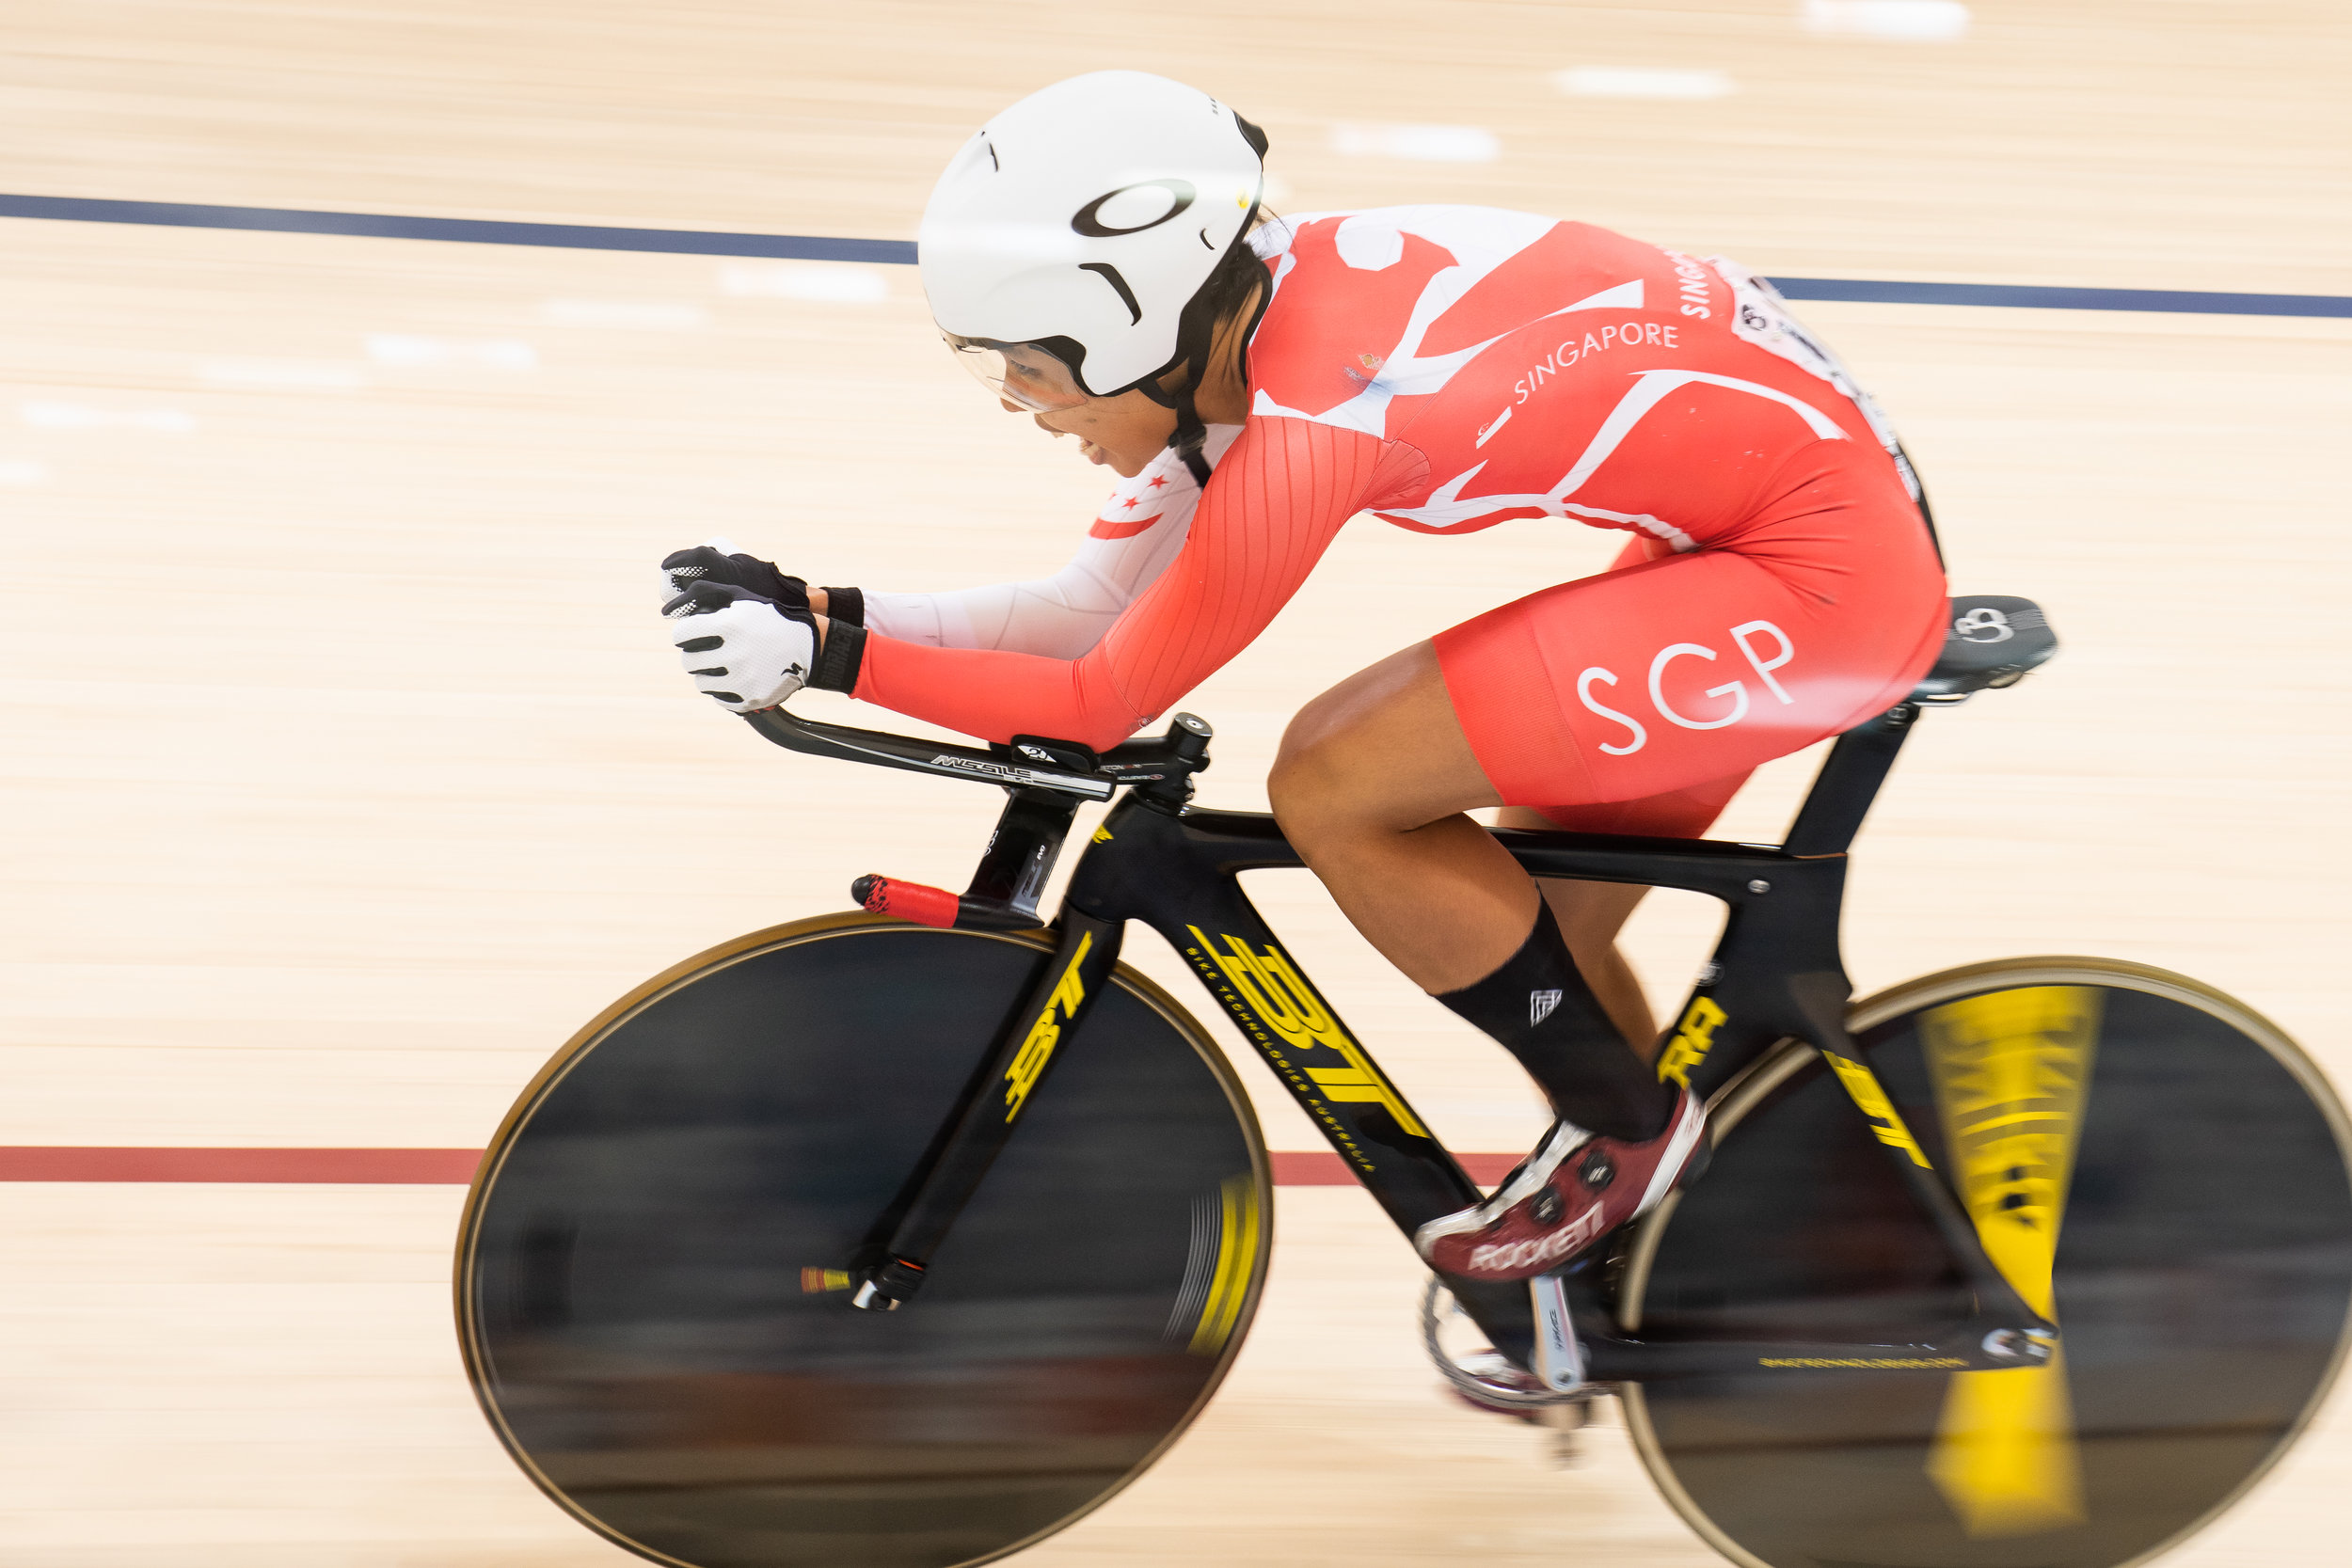 A Singaporean cyclist during the Asian Games at the Jakarta Velodrome.